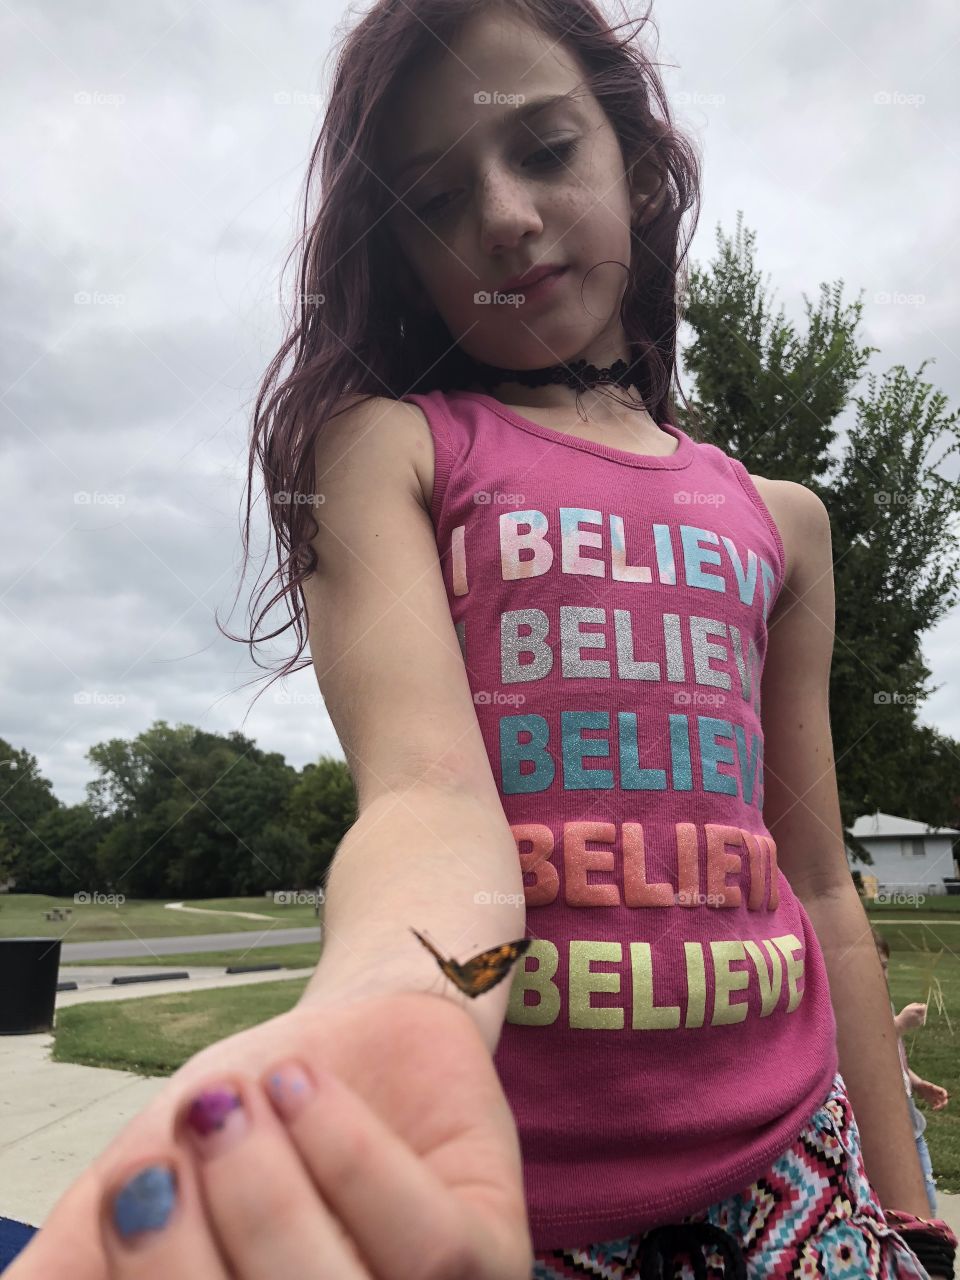 Tiny butterfly landed on her arm happy and peaceful 